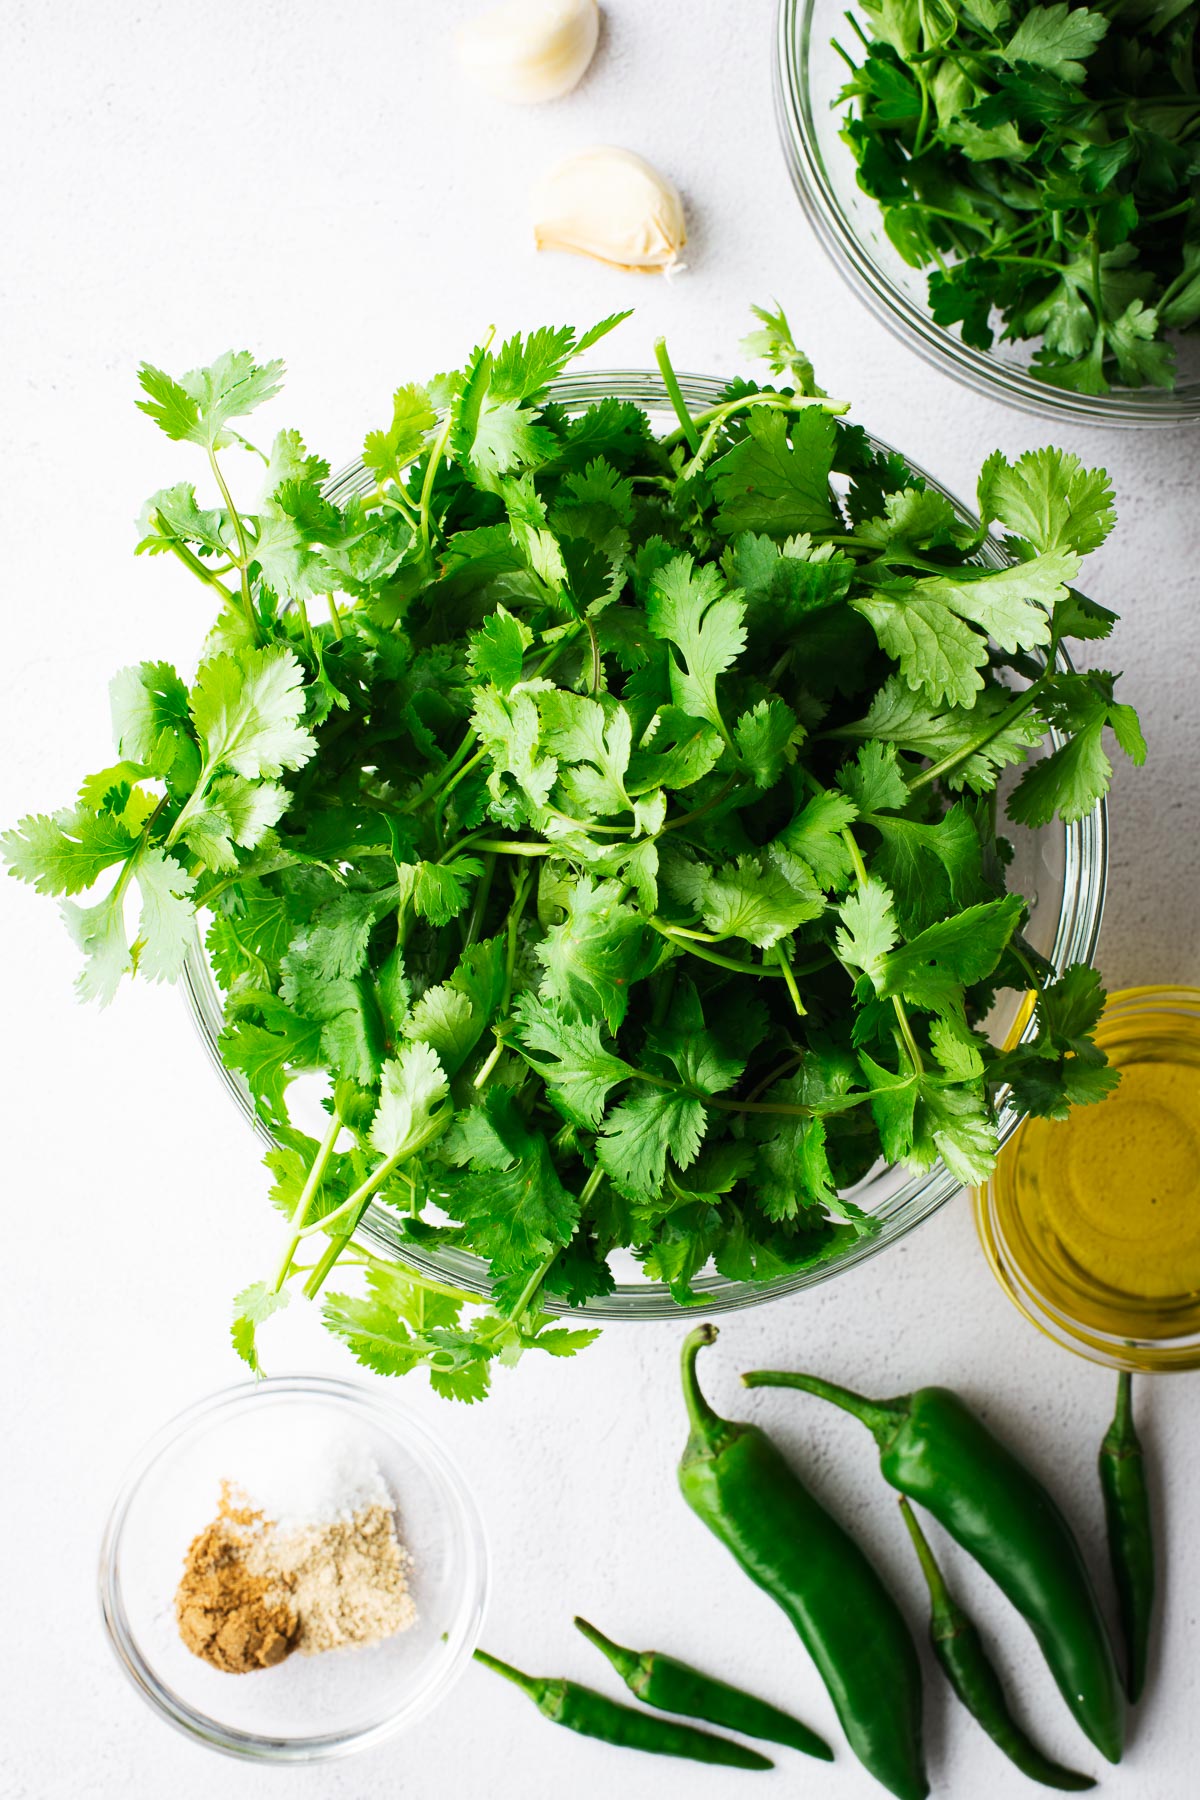 Coriander leaves in a glass bowl viewed from above, arranged in a flatlay with chillies, spices, olive oil, parsley and garlic cloves.